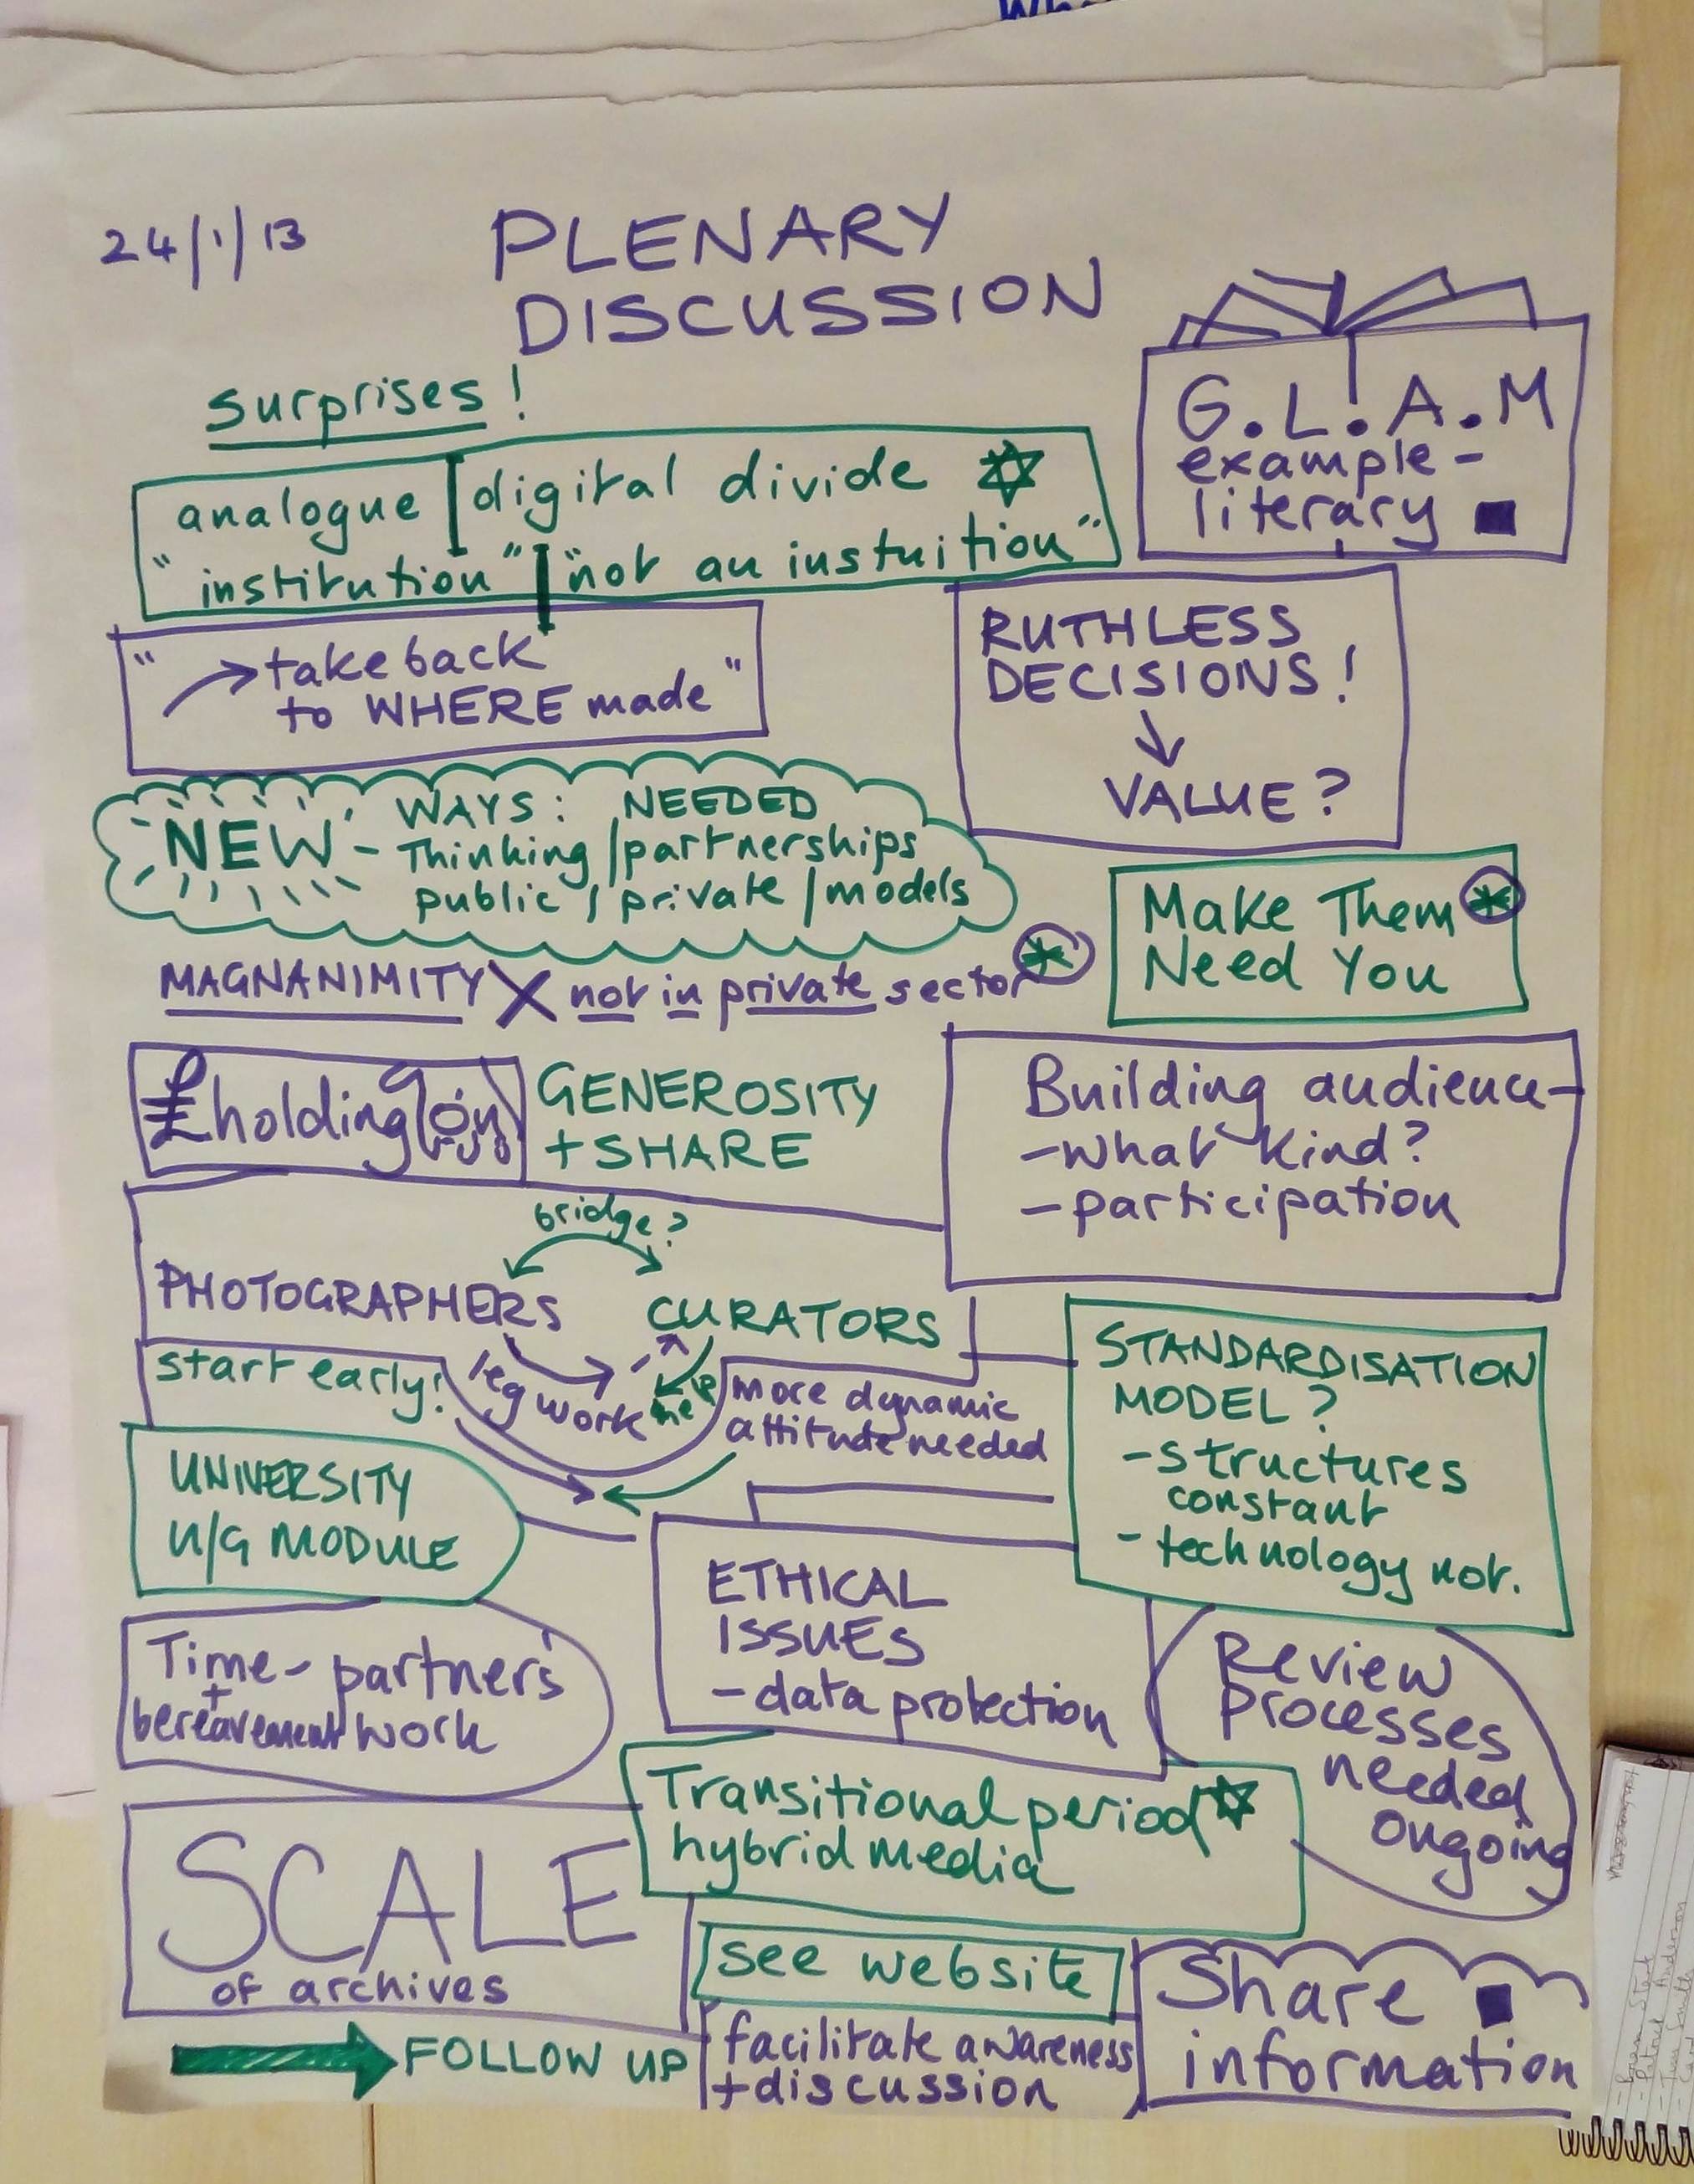 Summary of plenary discussion issues from Photographers' Legacy Project focus group